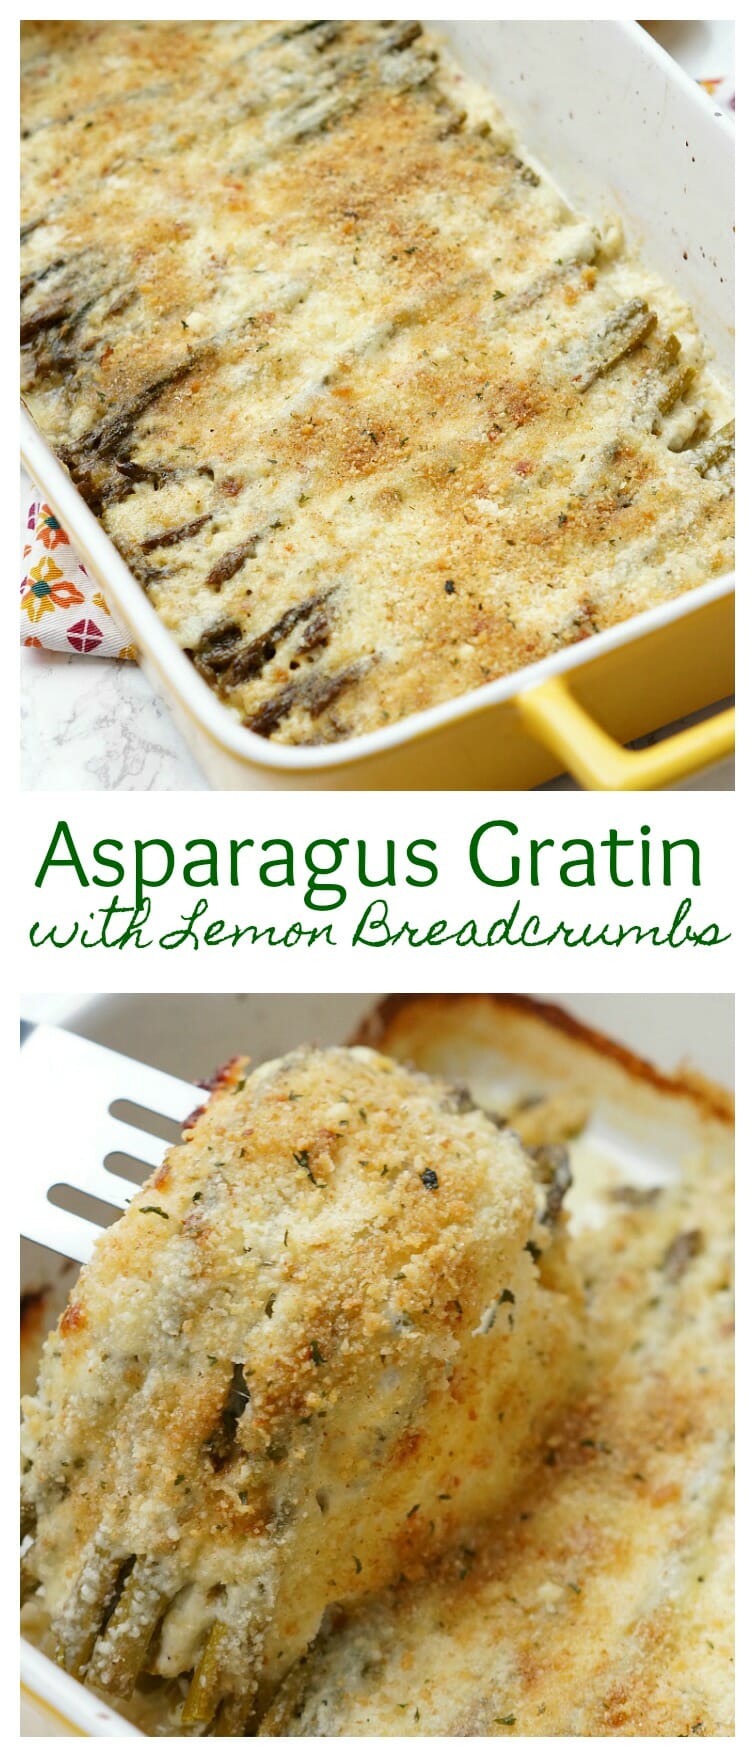 Asparagus Gratin with Lemon Breadcrumbs, an easy asparagus side dish recipe! Layers of roasted asparagus, cheese, and lemony breadcrumbs! 